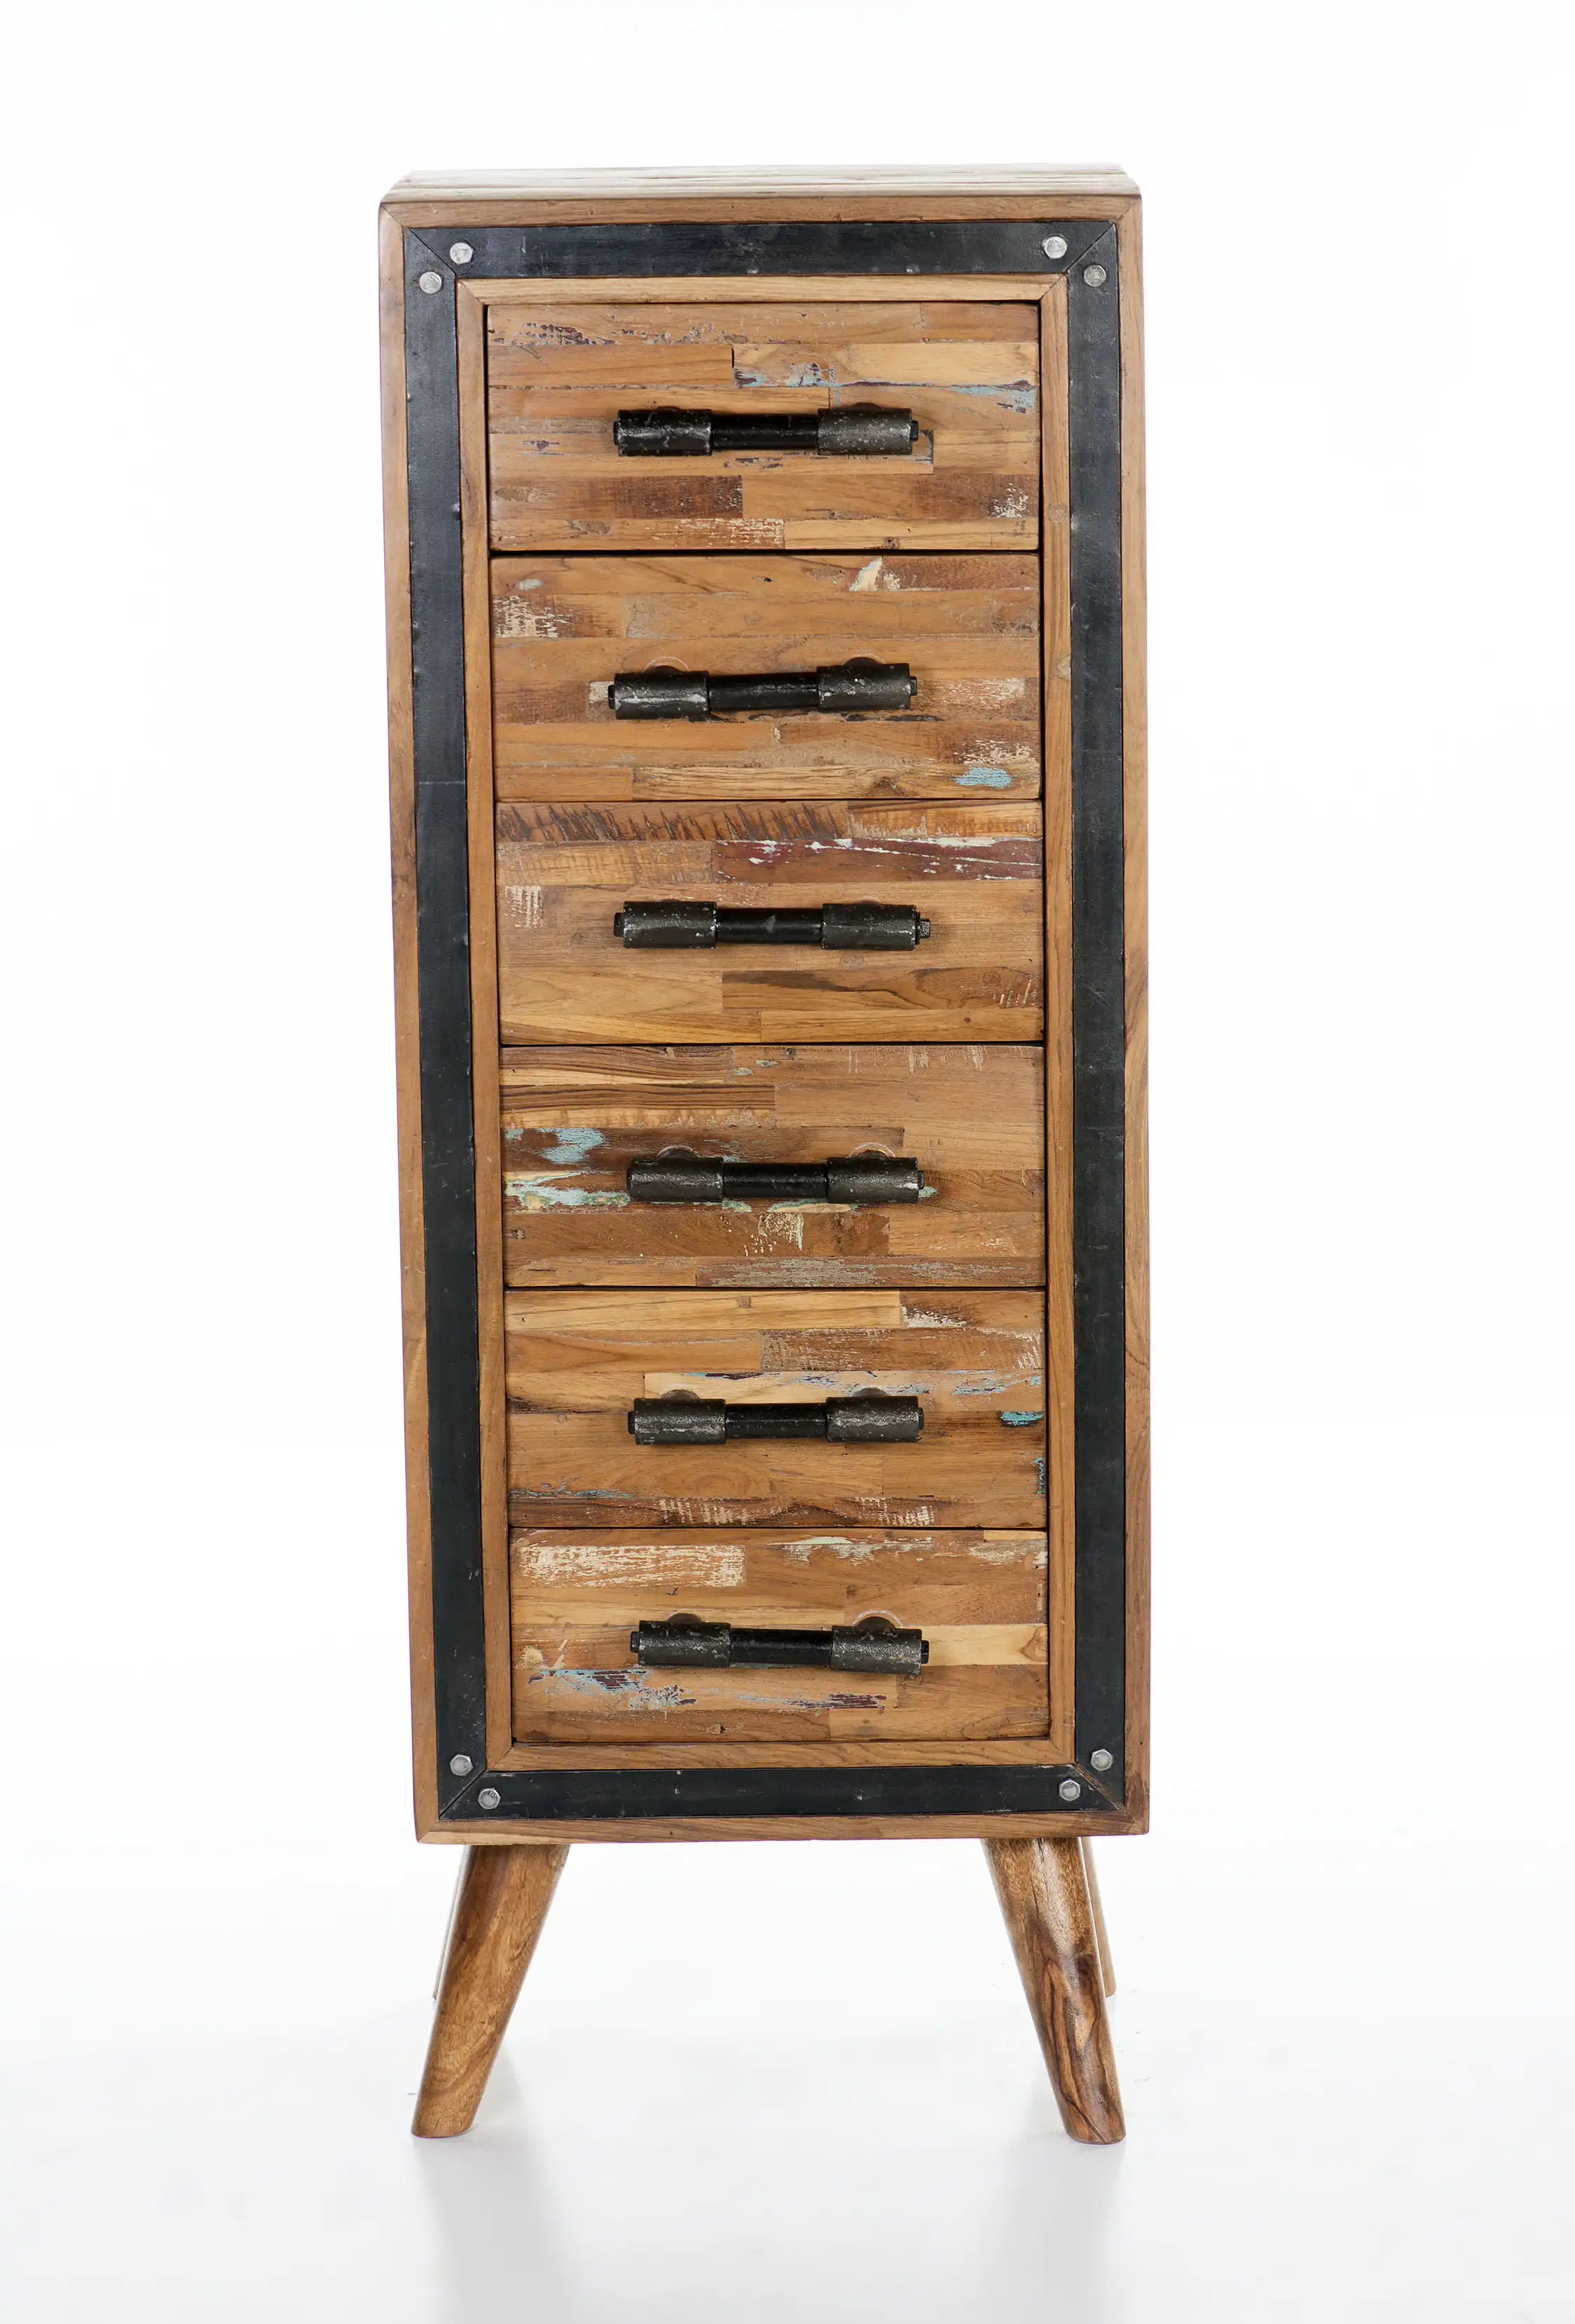 Reclaimed Wood Cabinet with 6 Drawers
(KD) - popular handicrafts